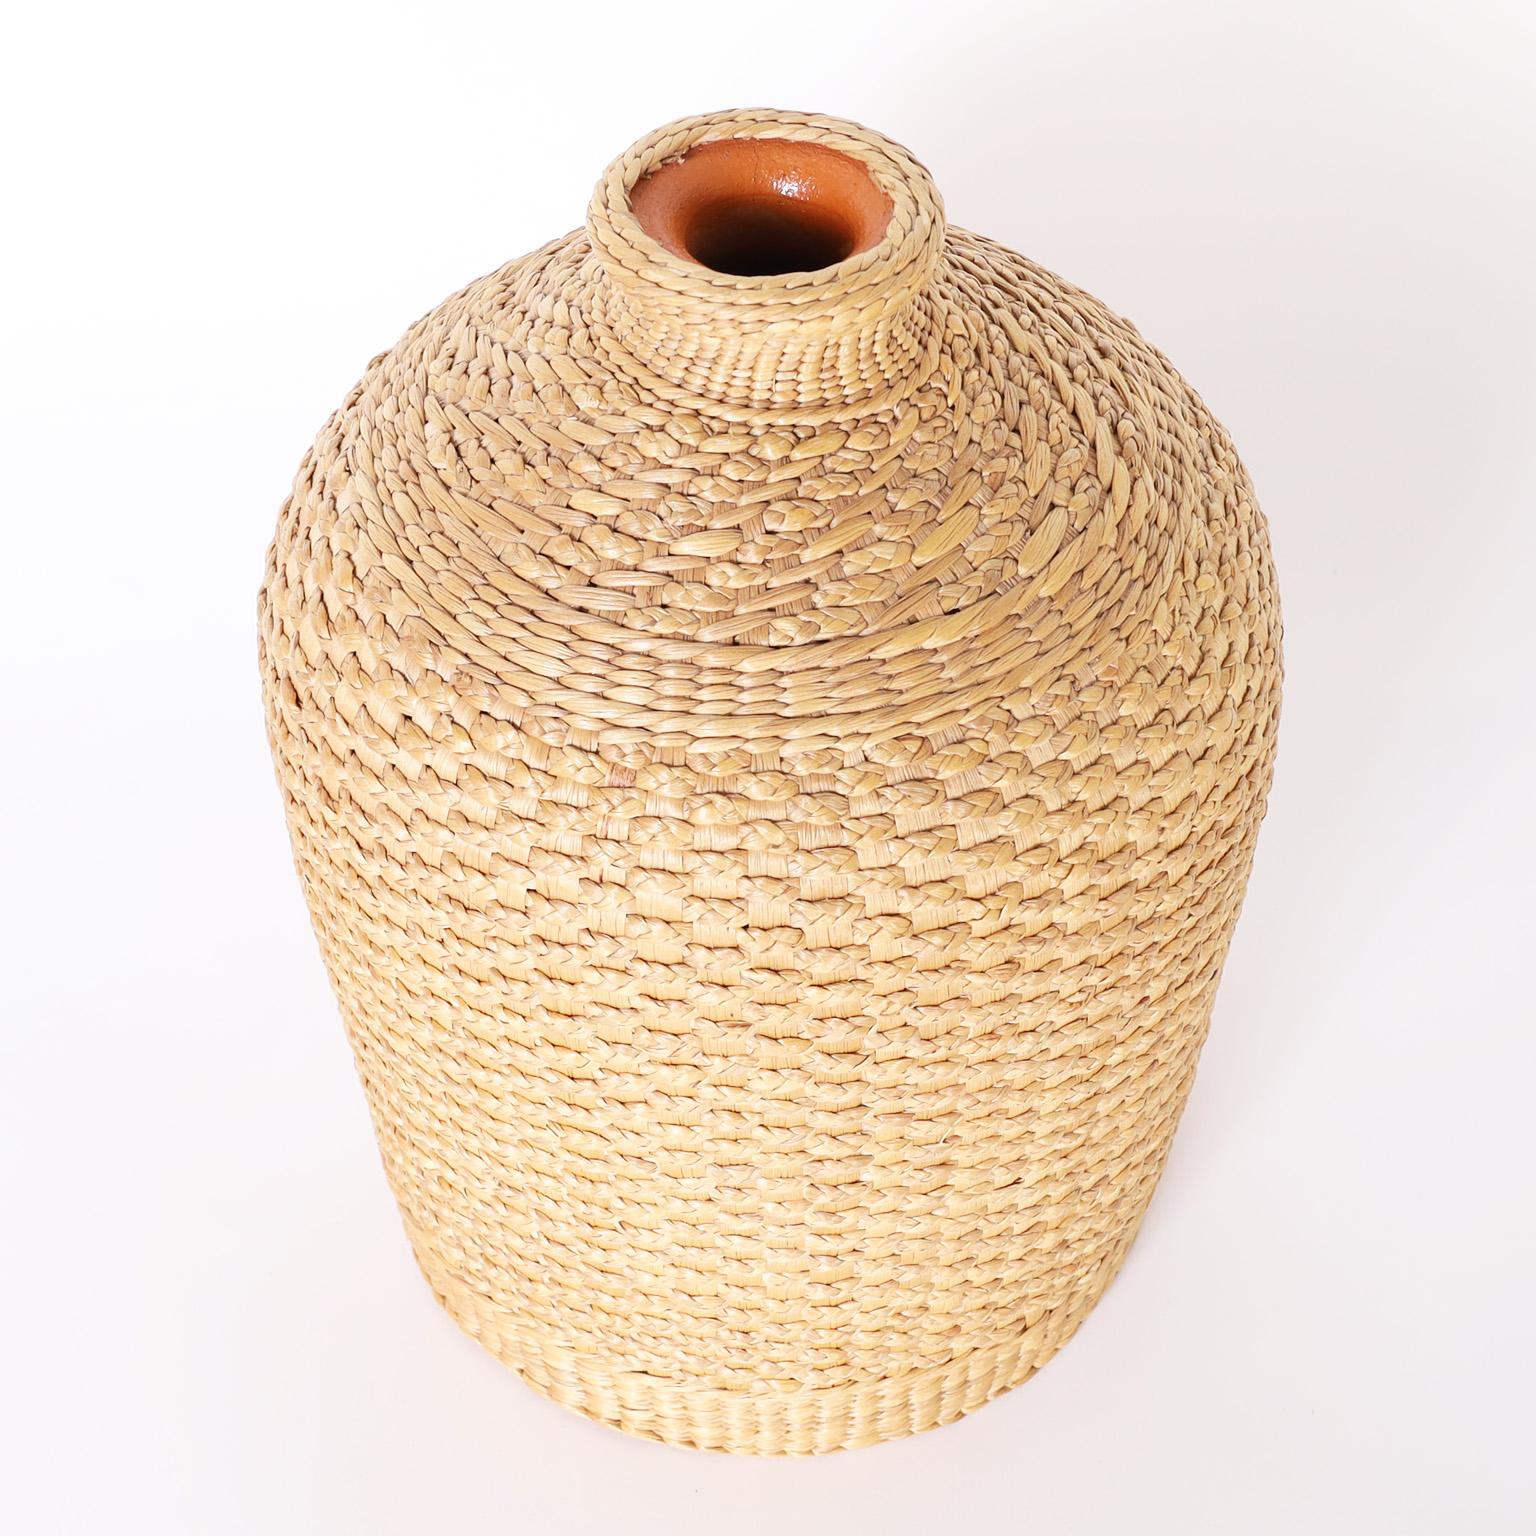 Unusual bottle or vase crafted in terra cotta with classic form and covered in ambitiously woven reed.